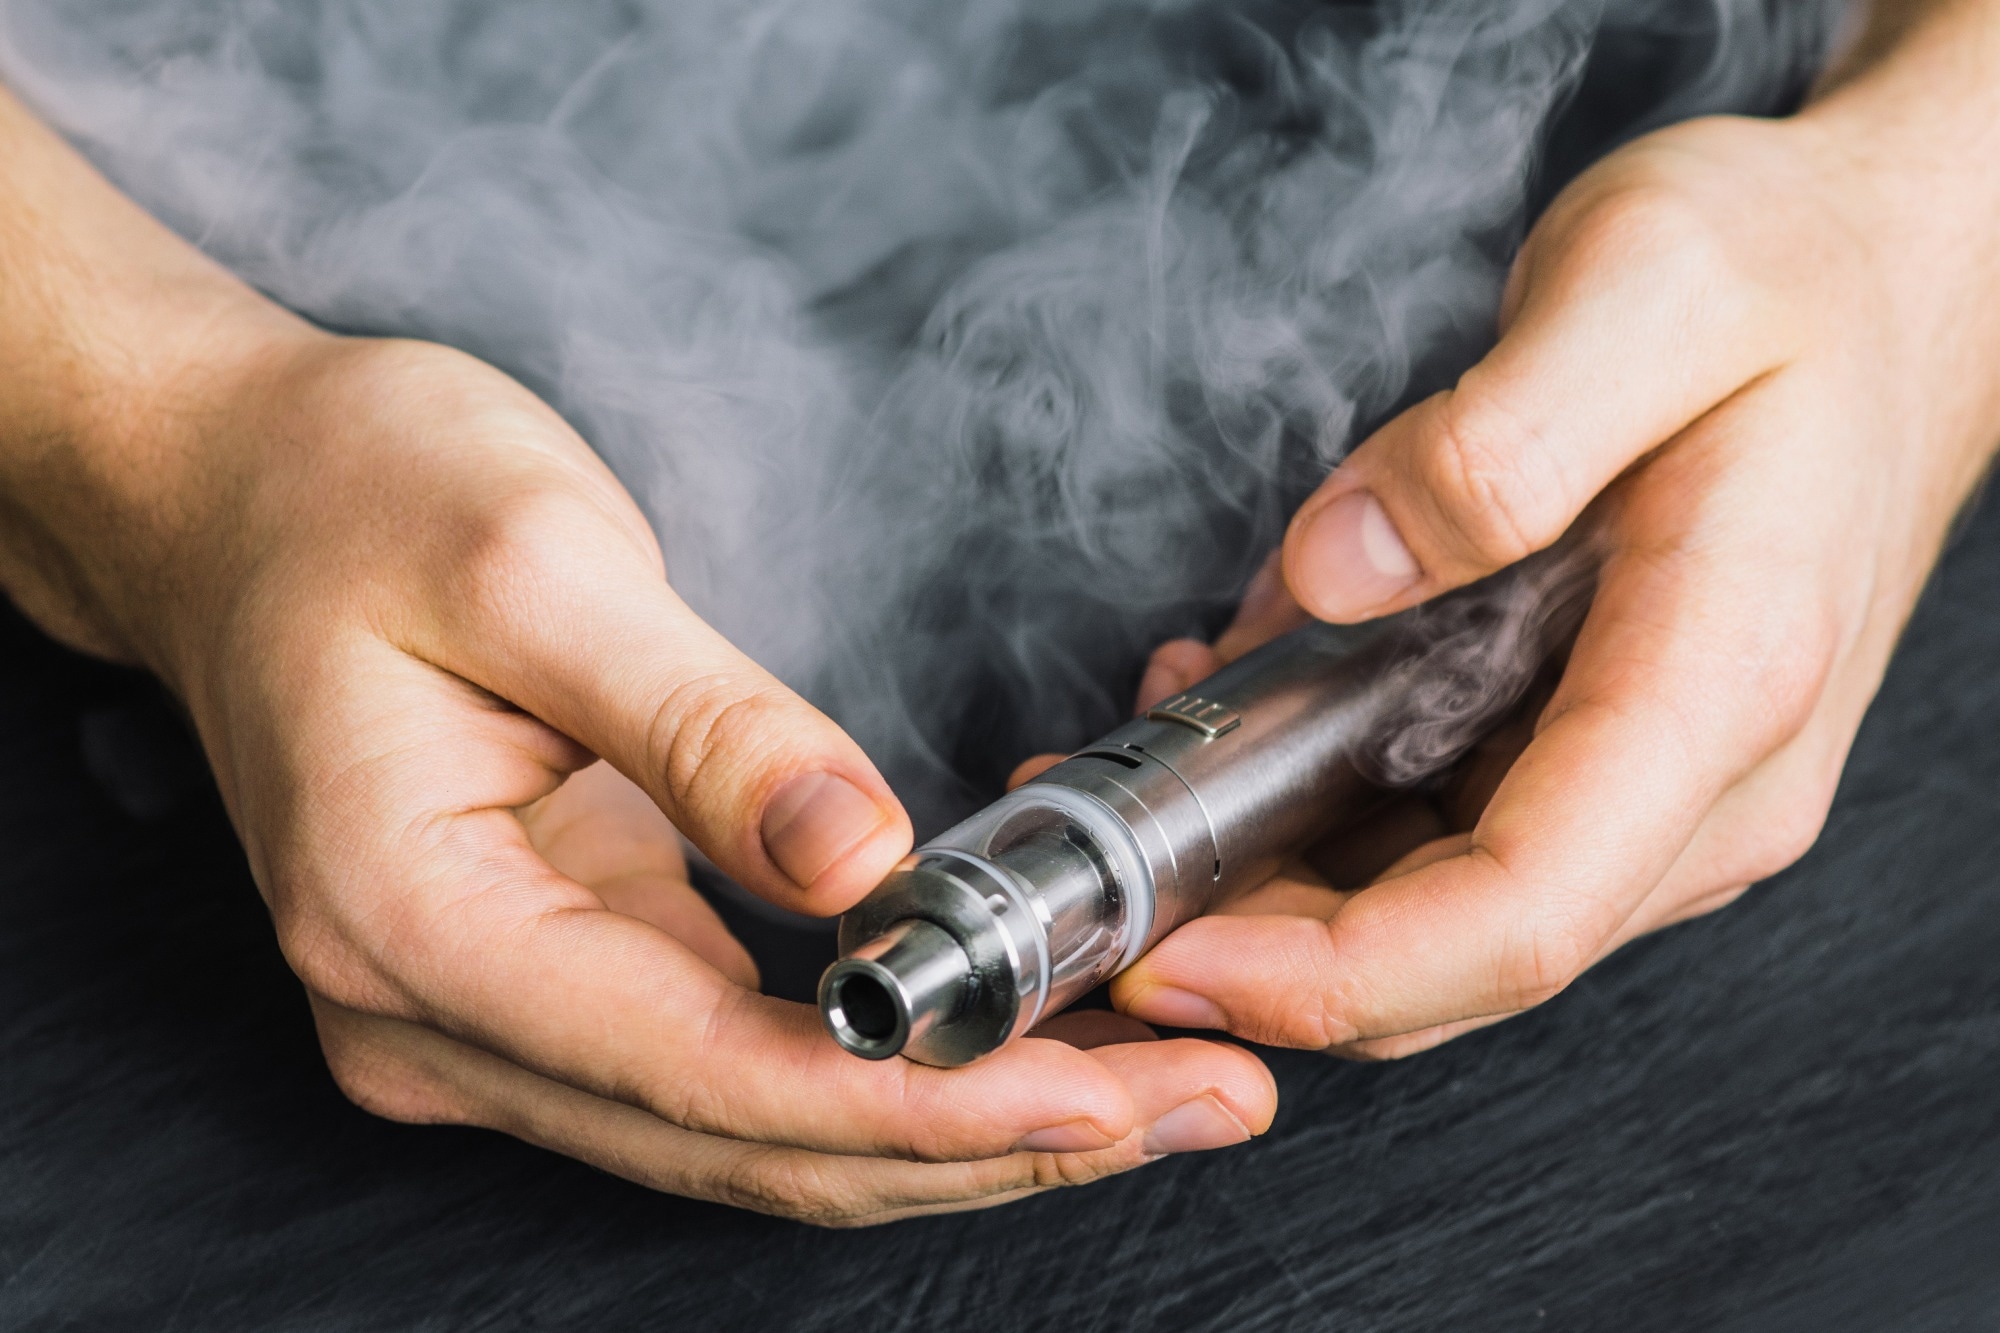 Study: Trends in Current Electronic Cigarette Use Among Youths by Age, Sex, and Race and EthnicityImage Credit: Dmytro Tyshchenko / Shutterstock